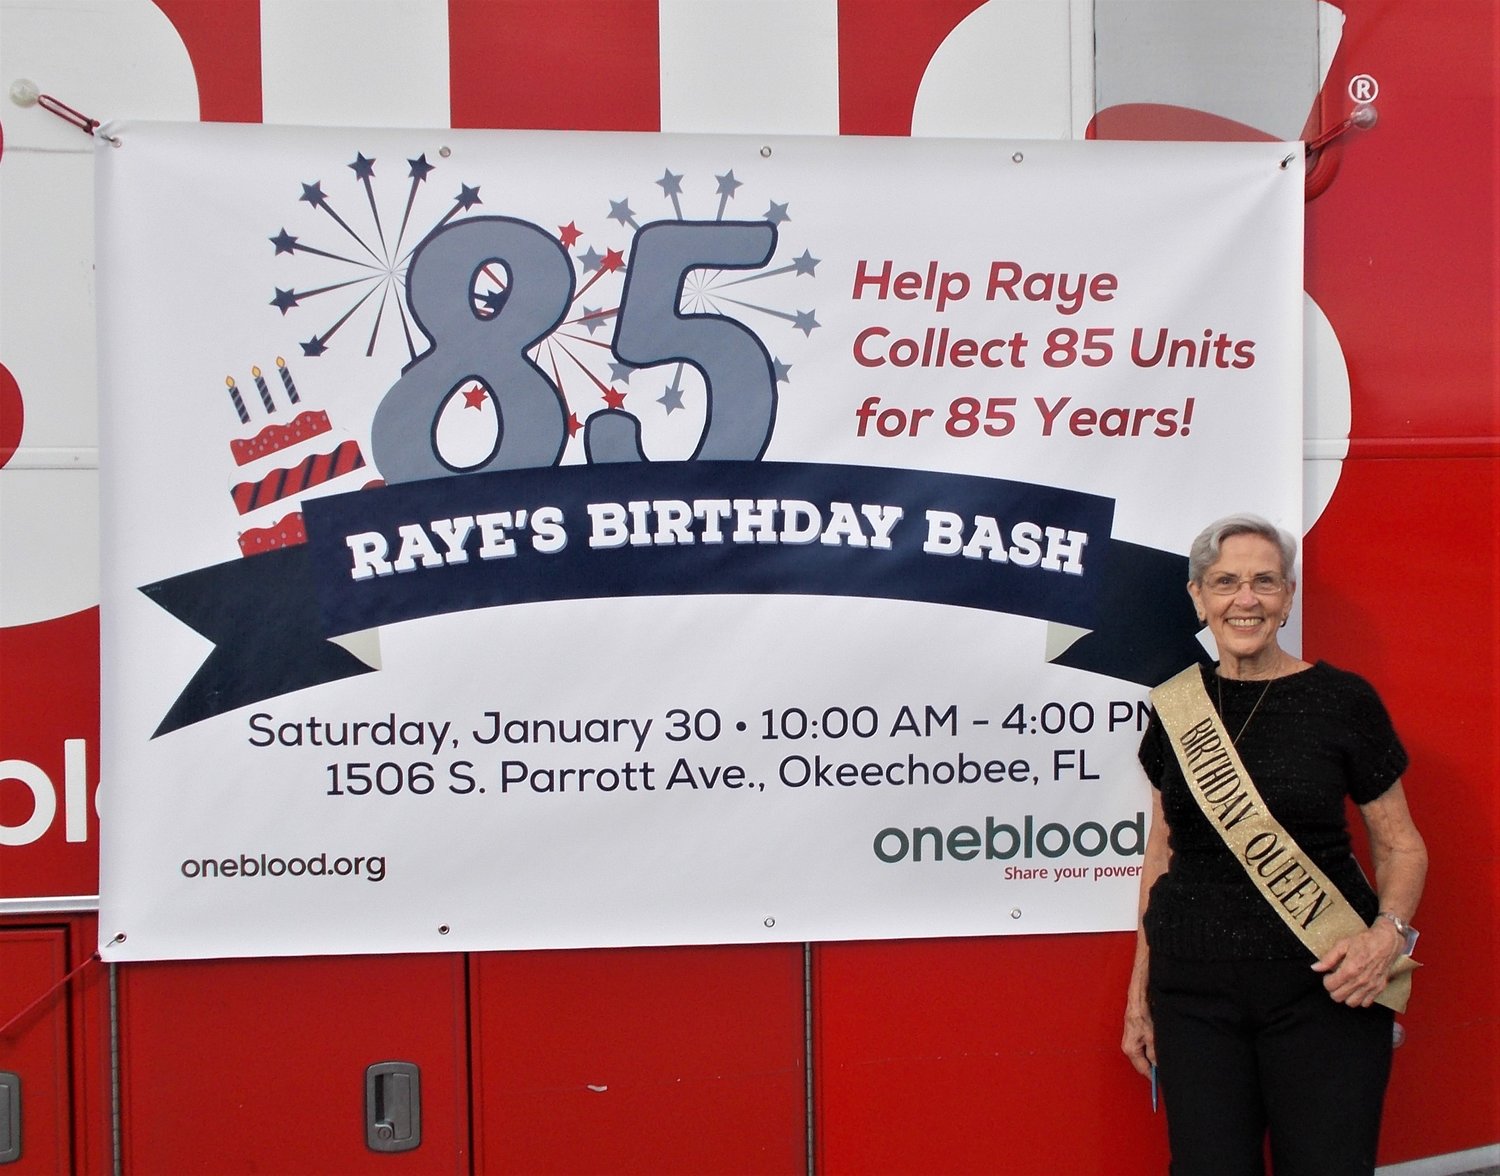 Although they did not quite meet their goal, Raye Deusinger considered the drive a wonderful success.